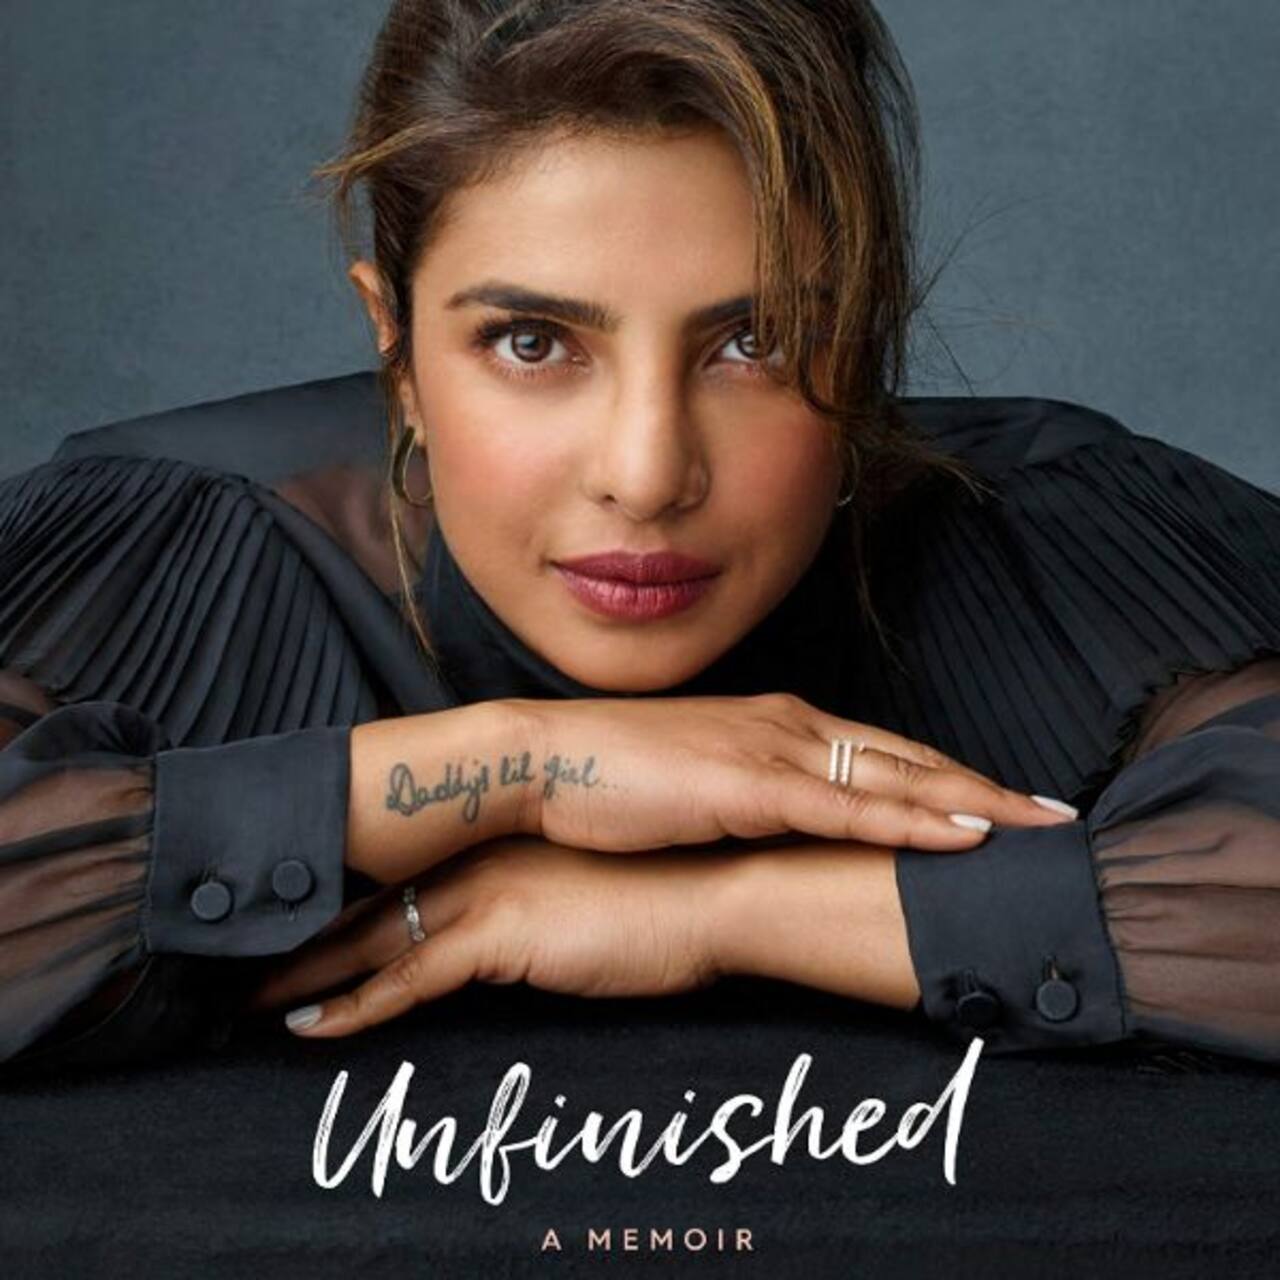 Priyanka Chopra Jonas' Unfinished: 7 intimate aspects about the actress' life that the memoir promises to reveal